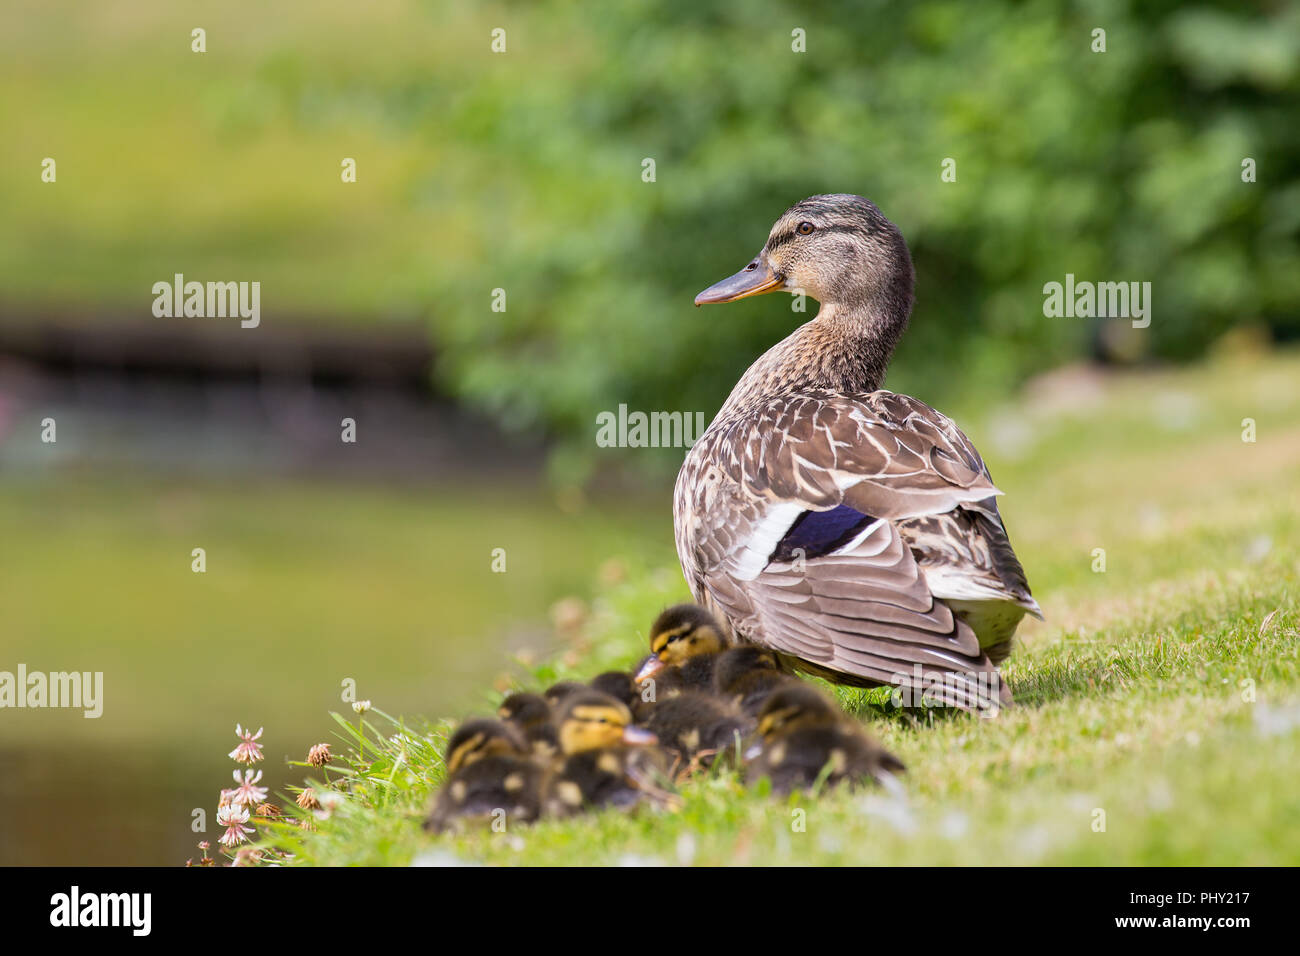 Mother duck watches over her young ducklings Stock Photo